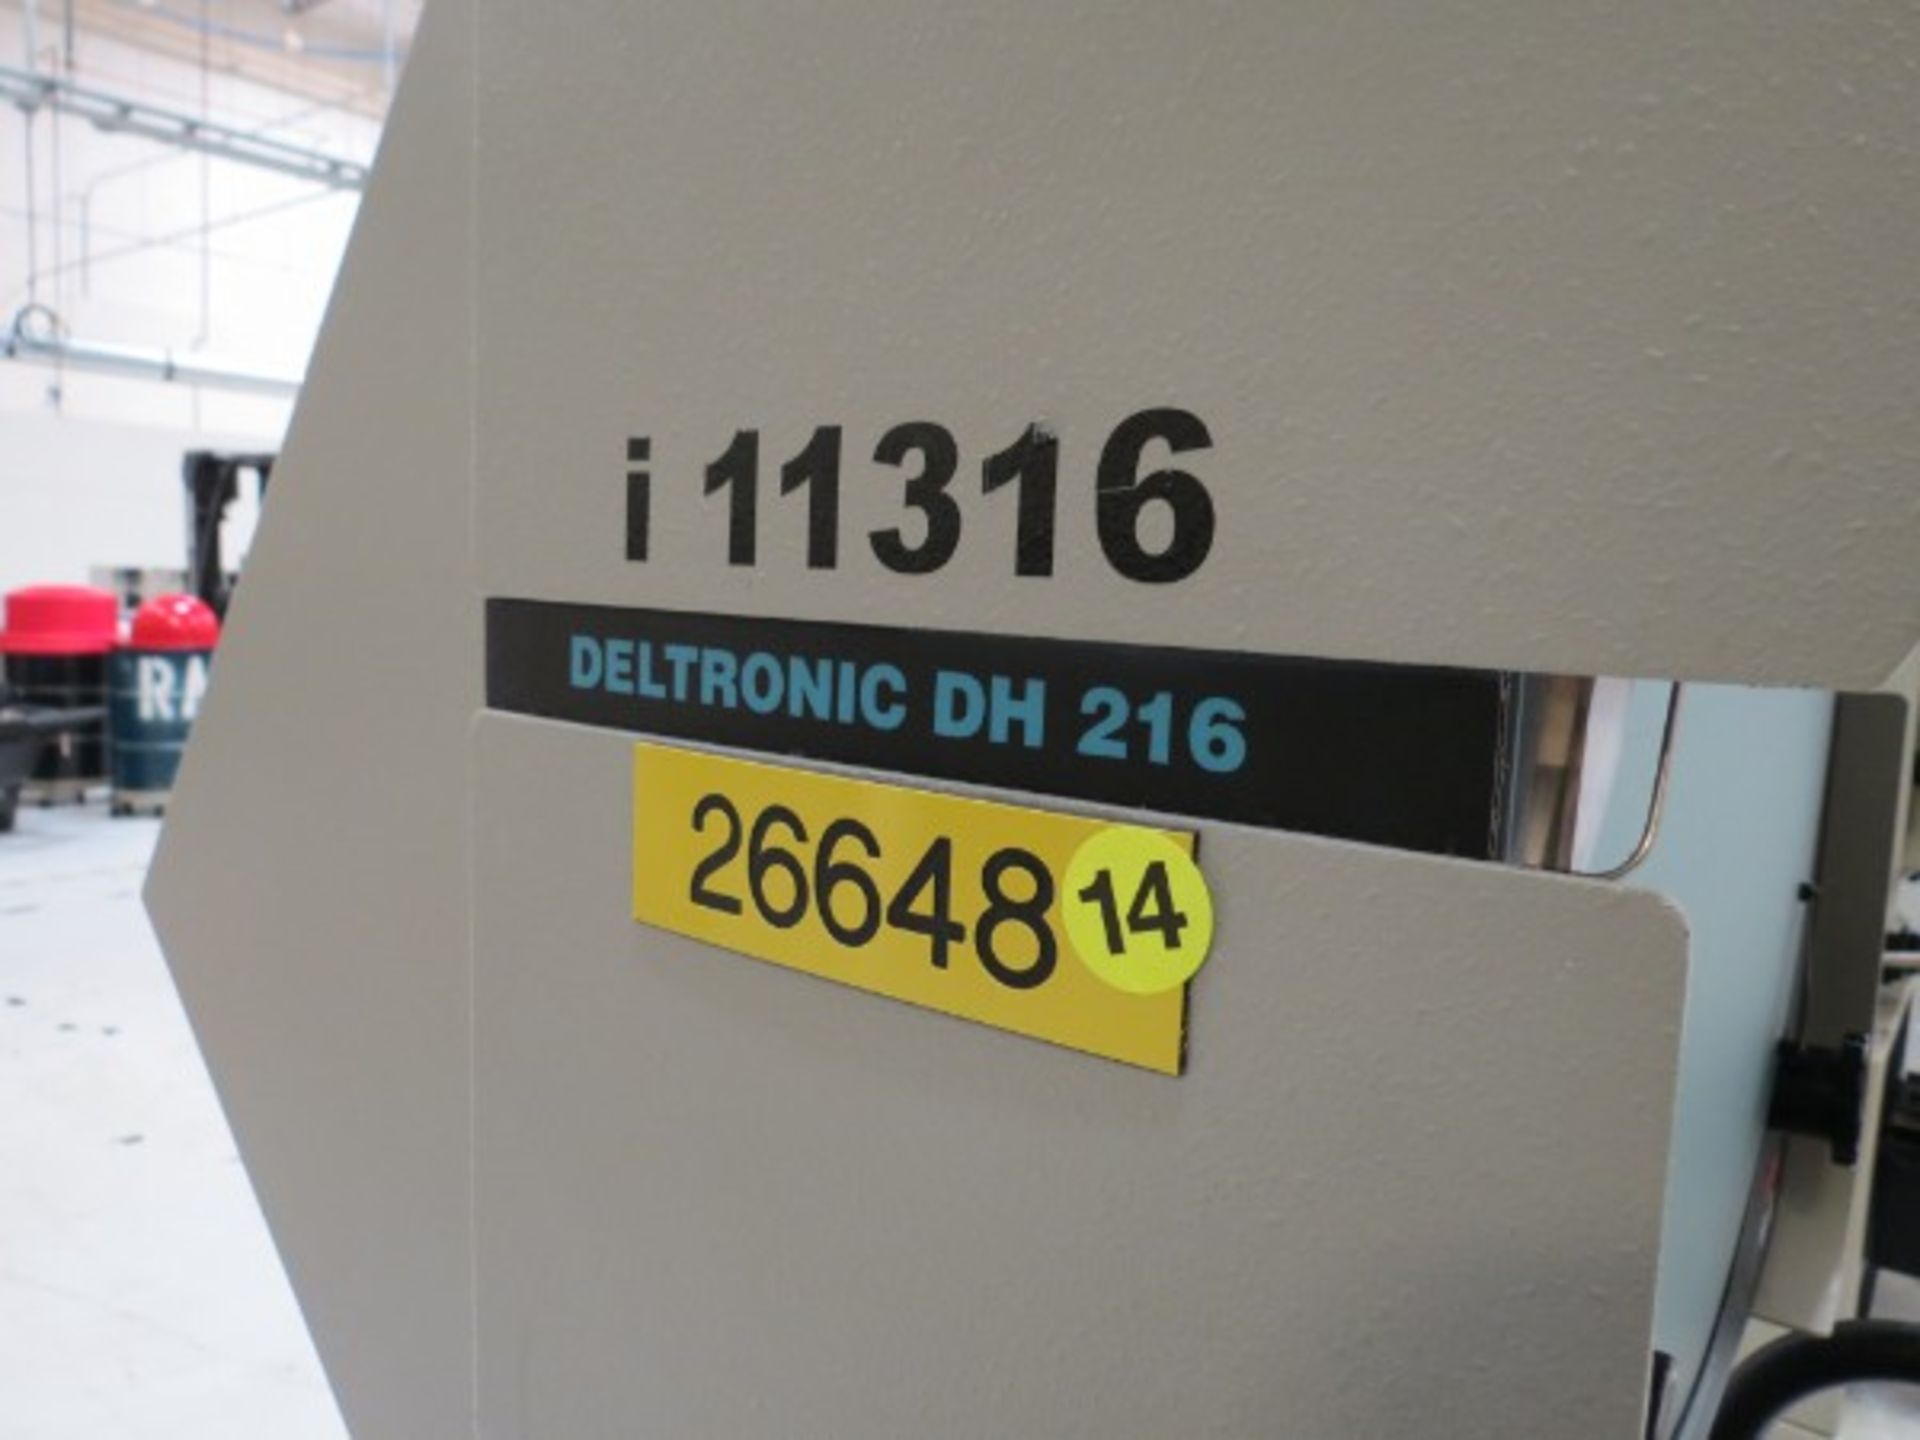 Deltronic DH216 16" Comparator, 50x magnifying lens, with DRO, S/N 306107829 - Image 4 of 5